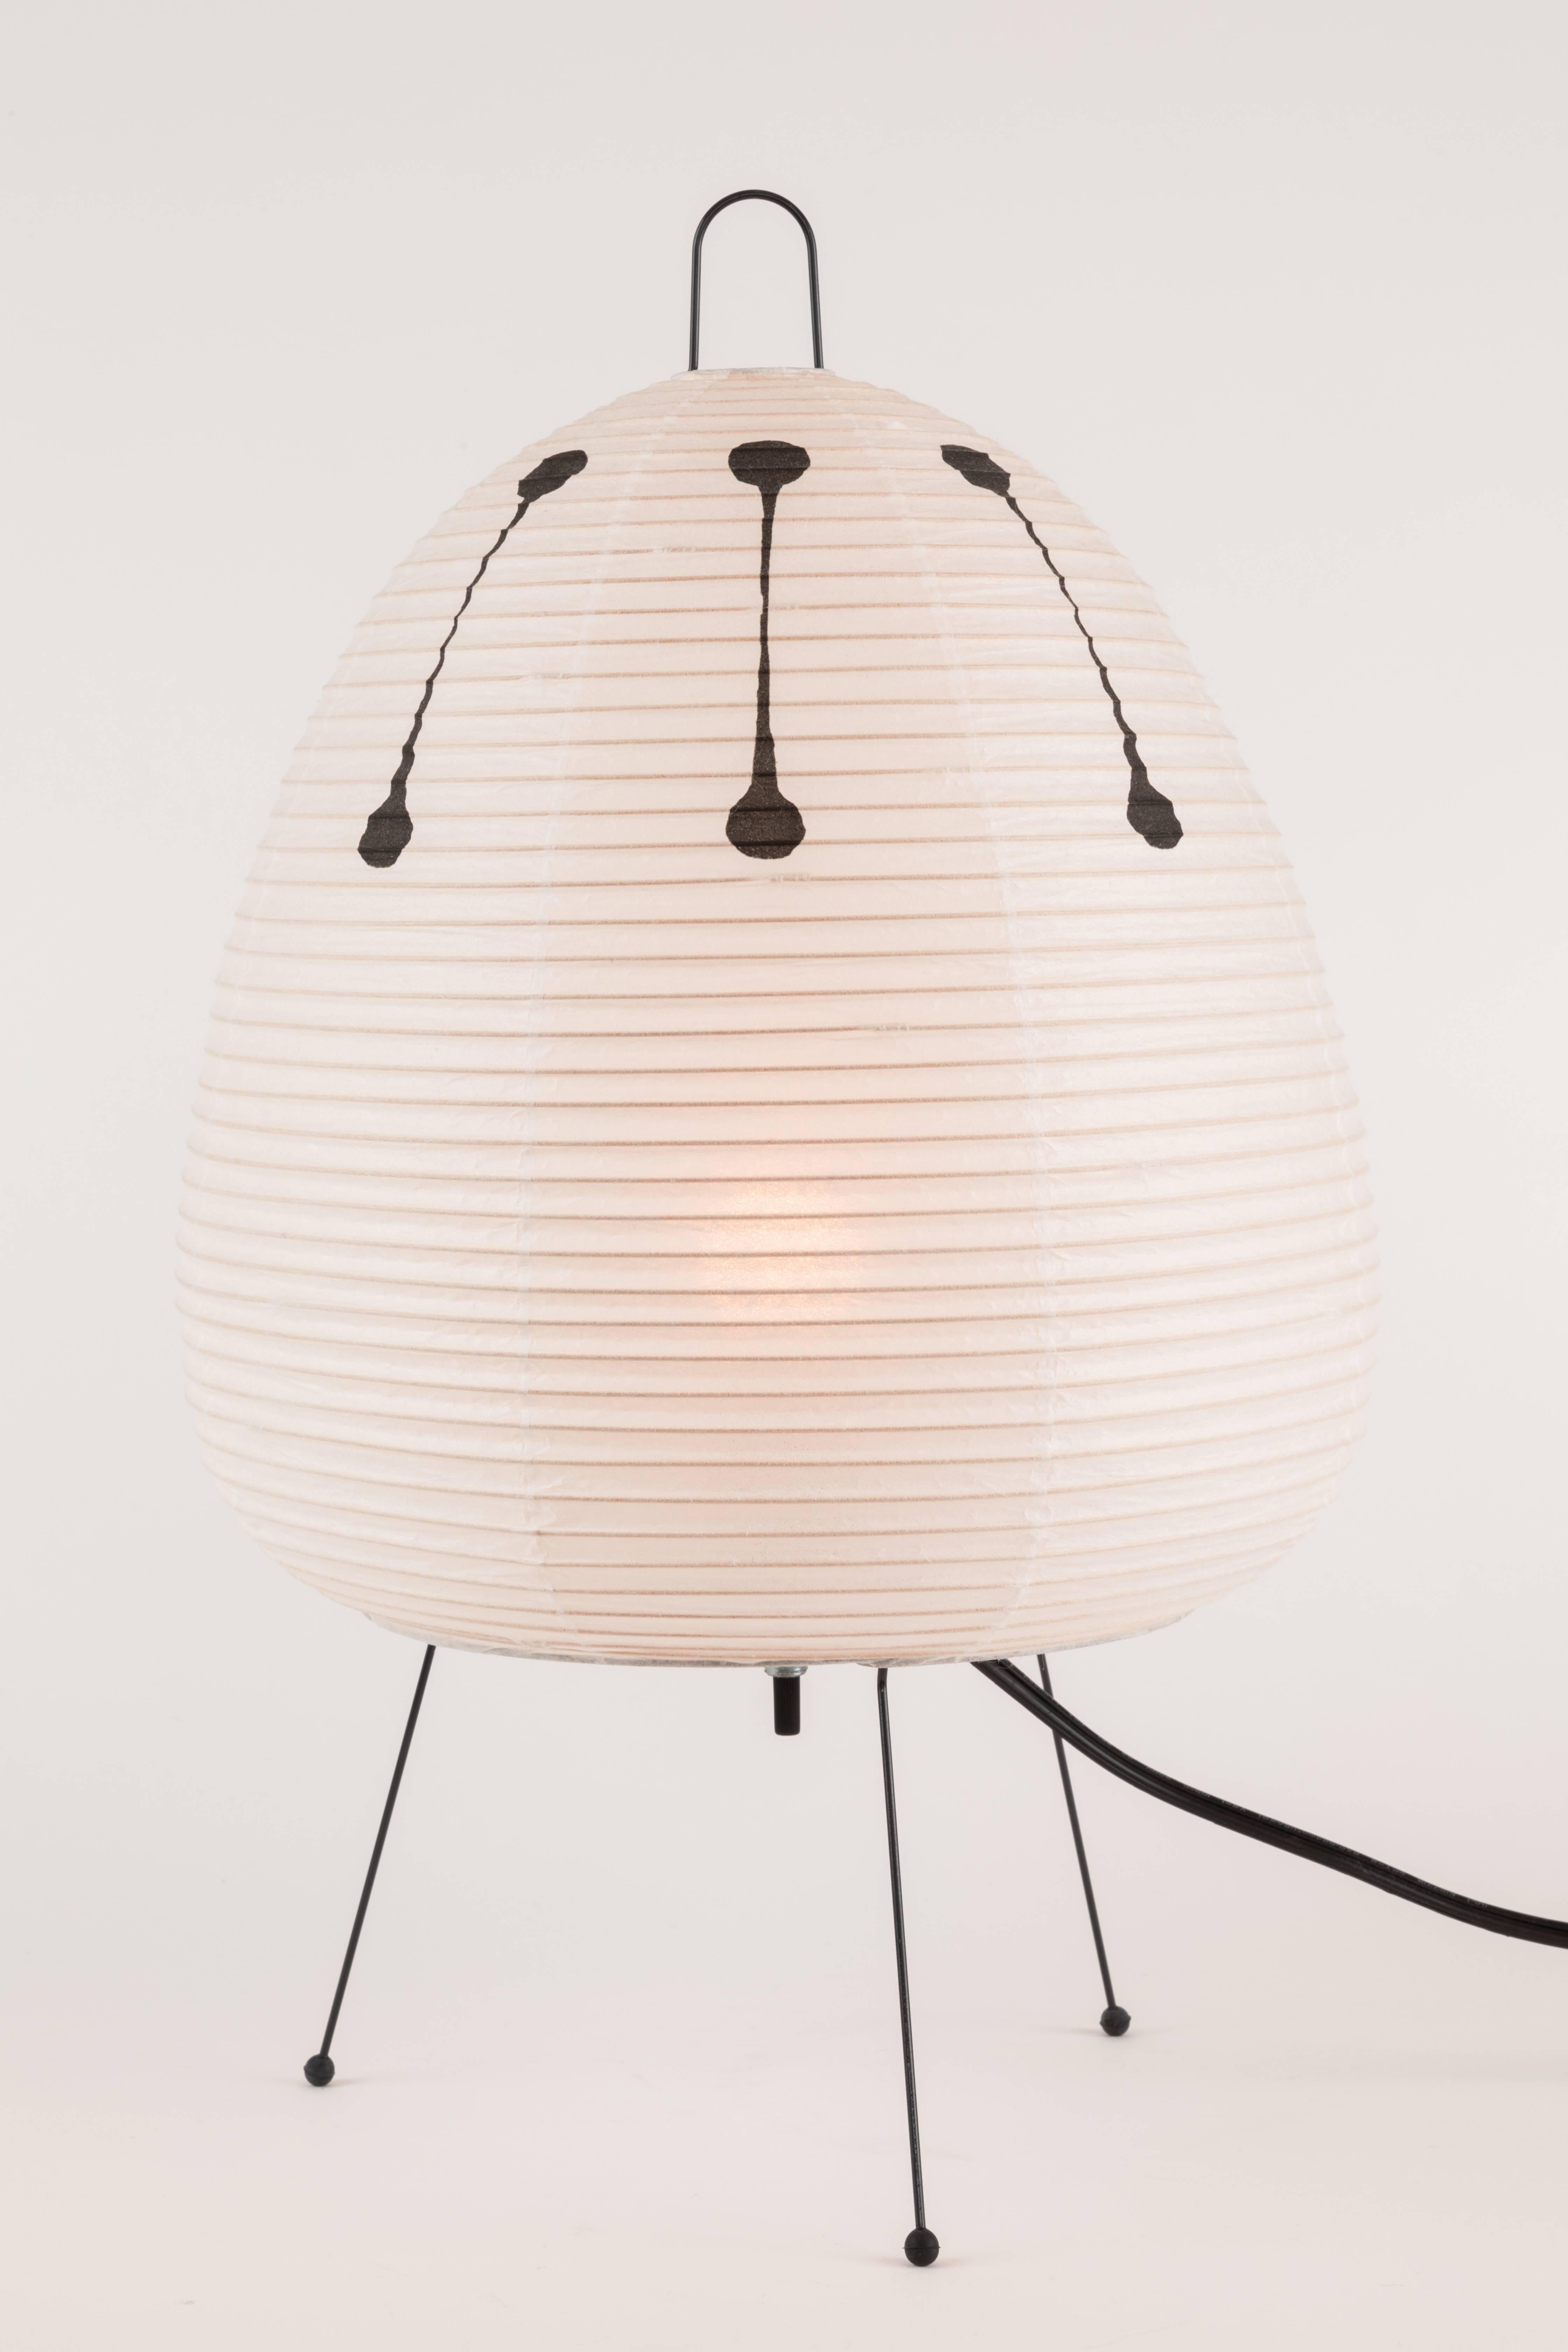 Akari model 1AD light sculpture by Isamu Noguchi. The shade is made from handmade washi paper and bamboo ribs with Noguchi Akari manufacturer's stamp. Akari light sculptures by Isamu Noguchi are considered icons of 1950s modern design. Designed by